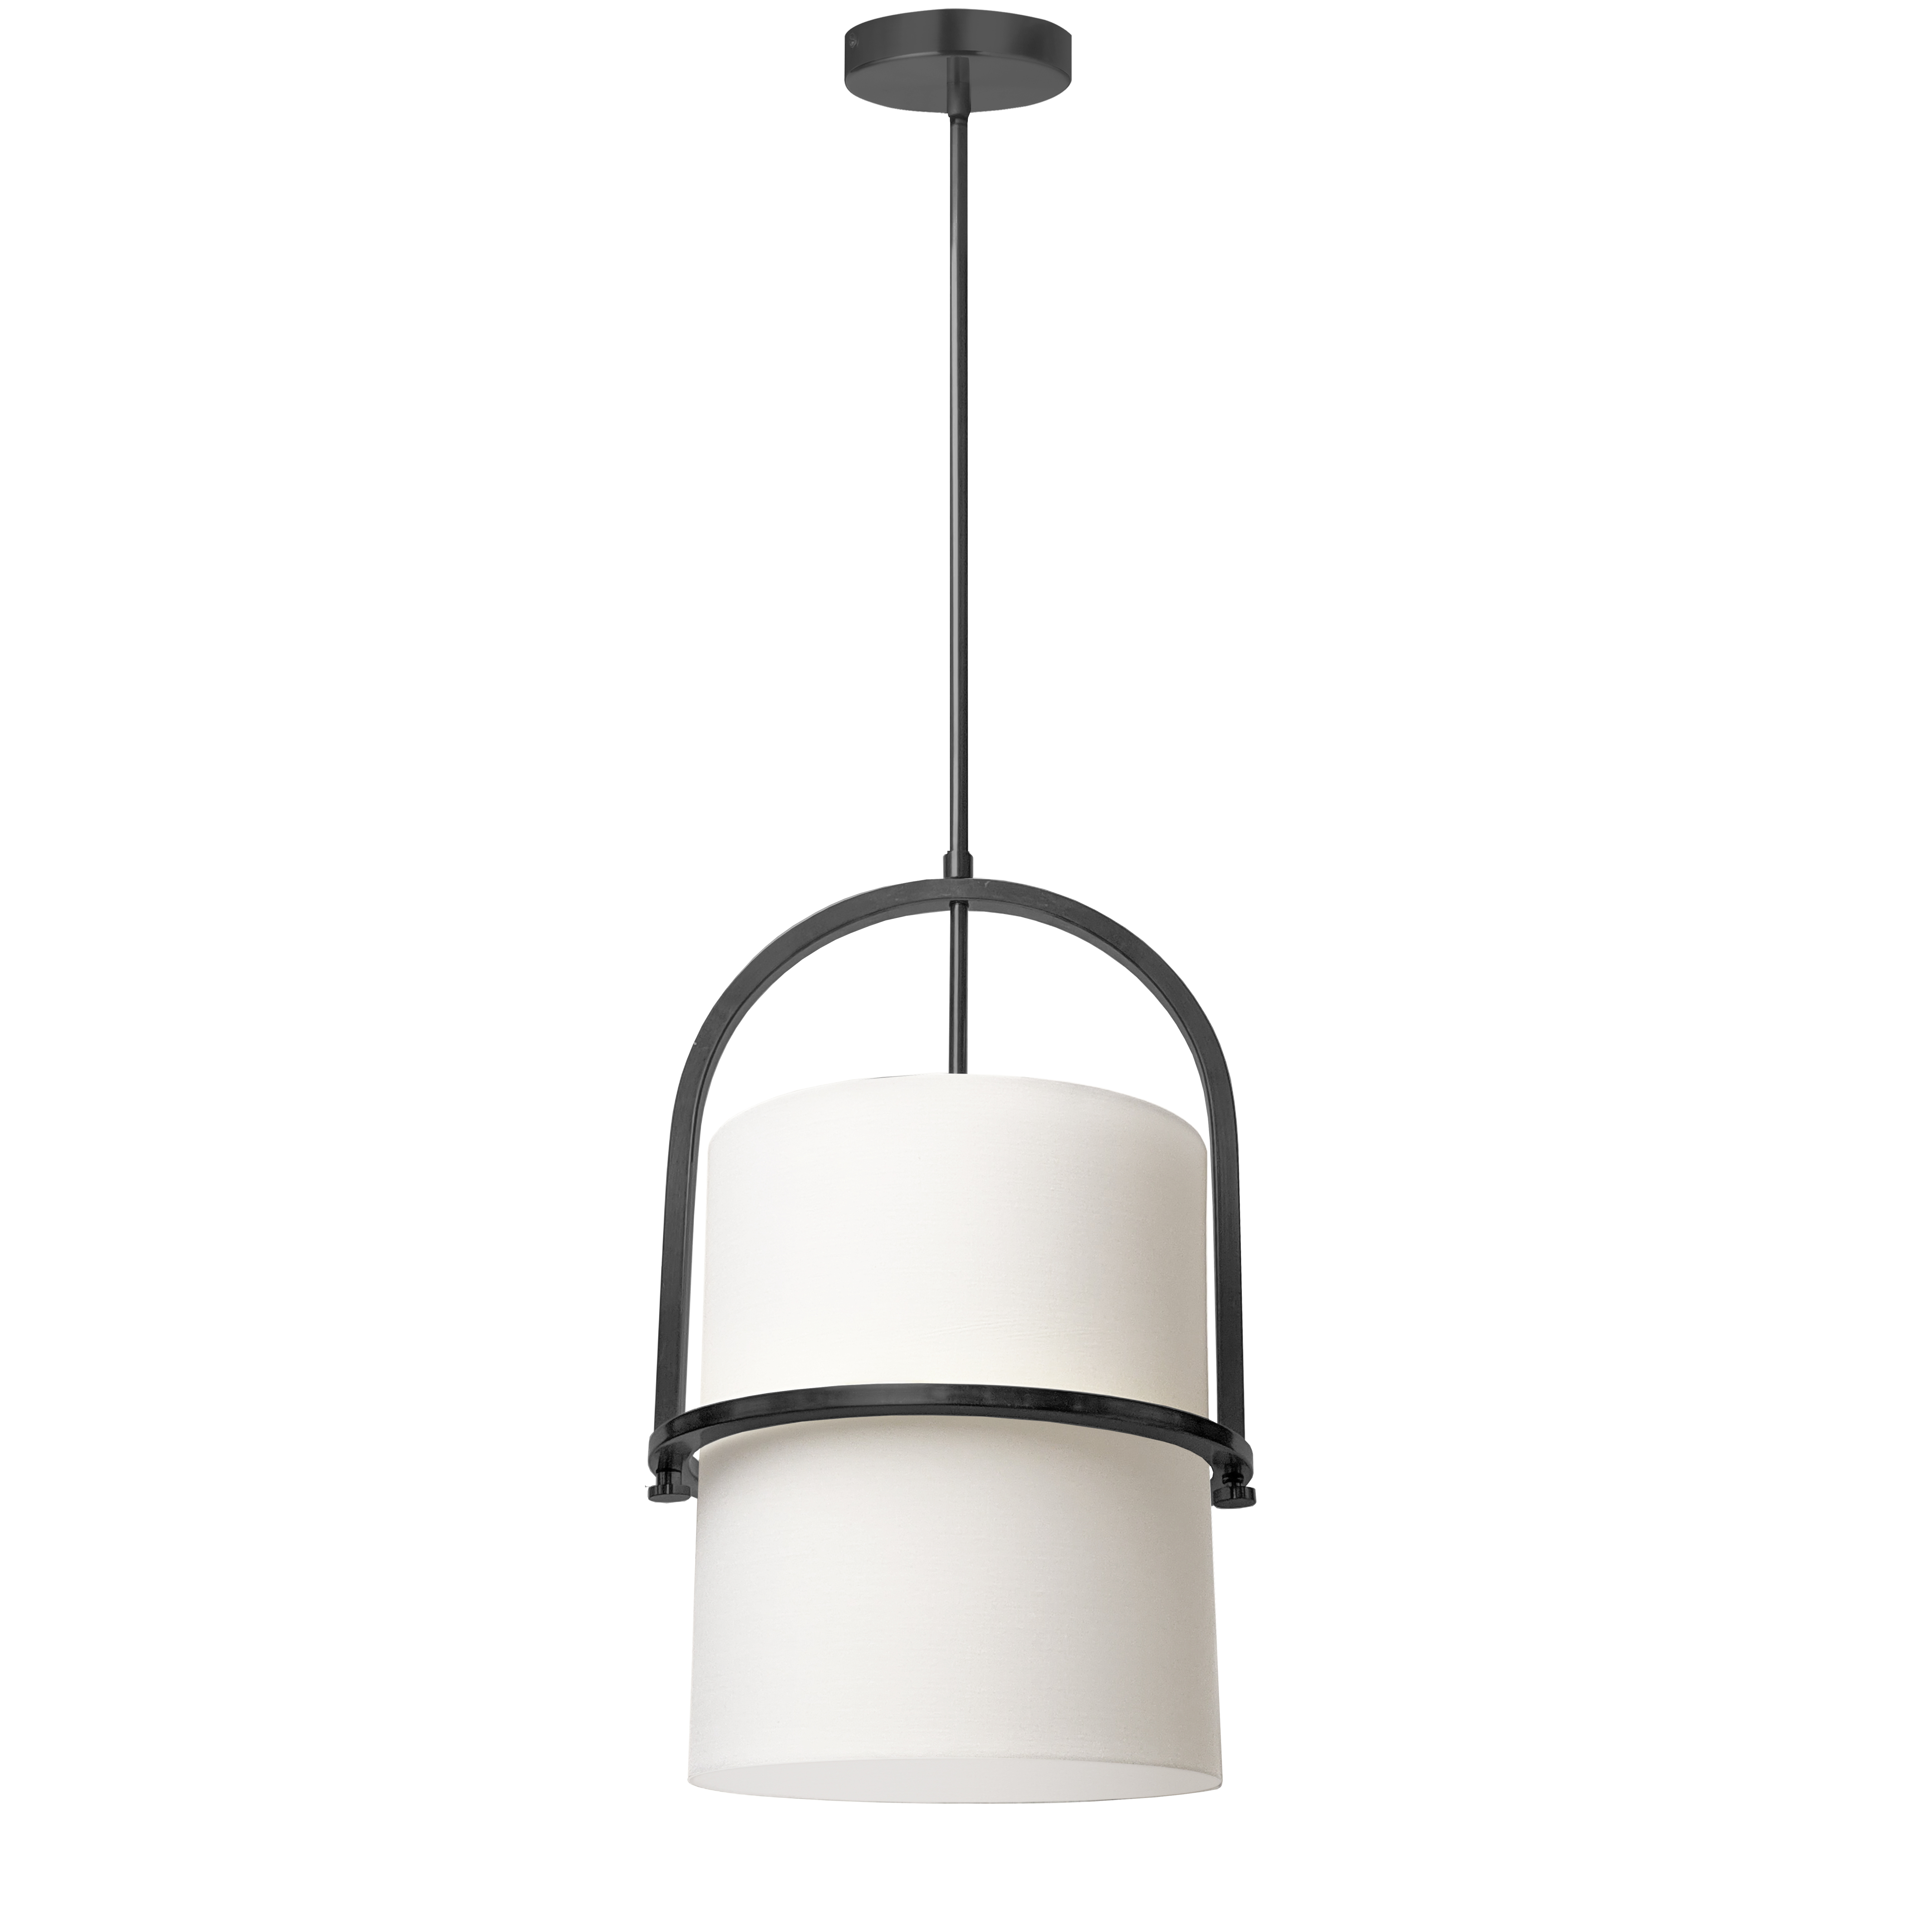 A simple idea adds up to a noticeable pop of style in the Paddington family of lighting. Its chic details are incorporated into a modest silhouette that will add a fashionable note to any corner of your home. The metal frame in your choice of finish contrasts with a white fabric shade in a simple cylindrical drum, with linear detail that adds eye appeal. It's a look that balances simplicity with eye-catching detail in a modern sensibility. Paddington lighting, which works well in multiple configurations, is perfect for kitchens, living and dining rooms.